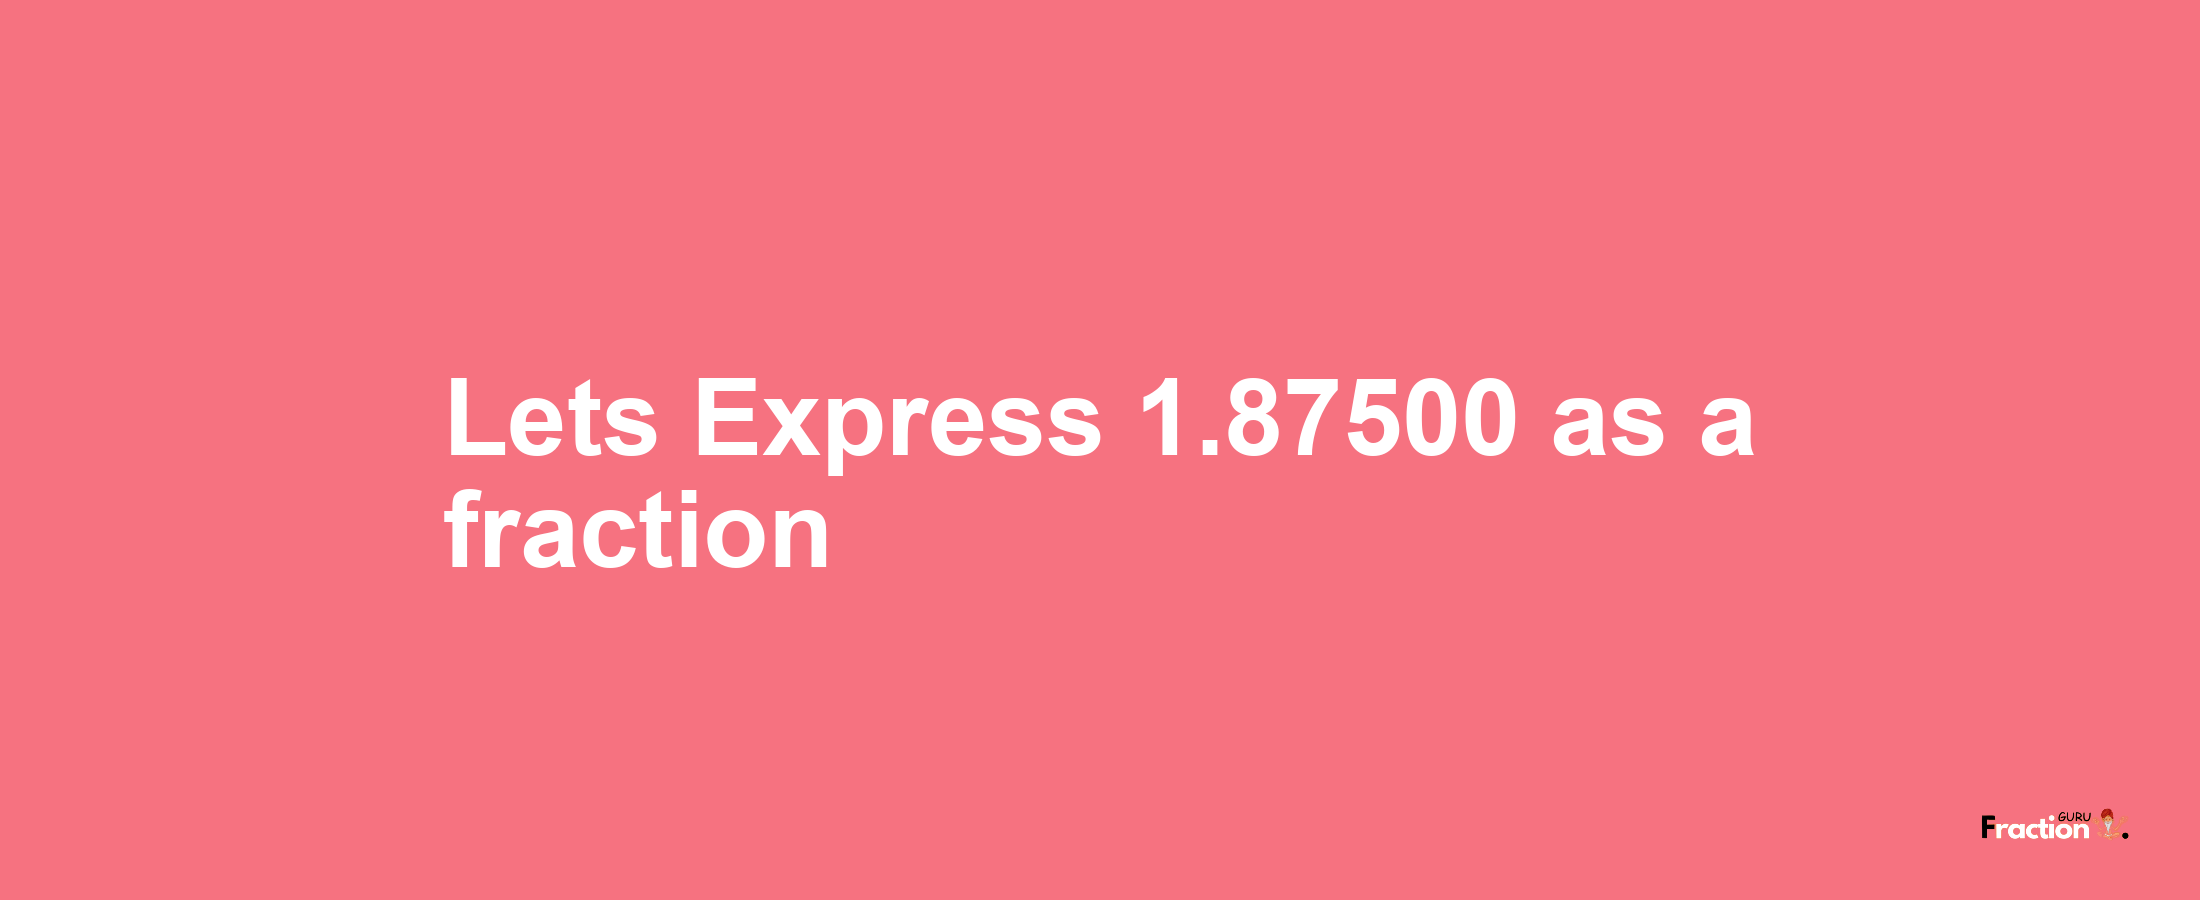 Lets Express 1.87500 as afraction